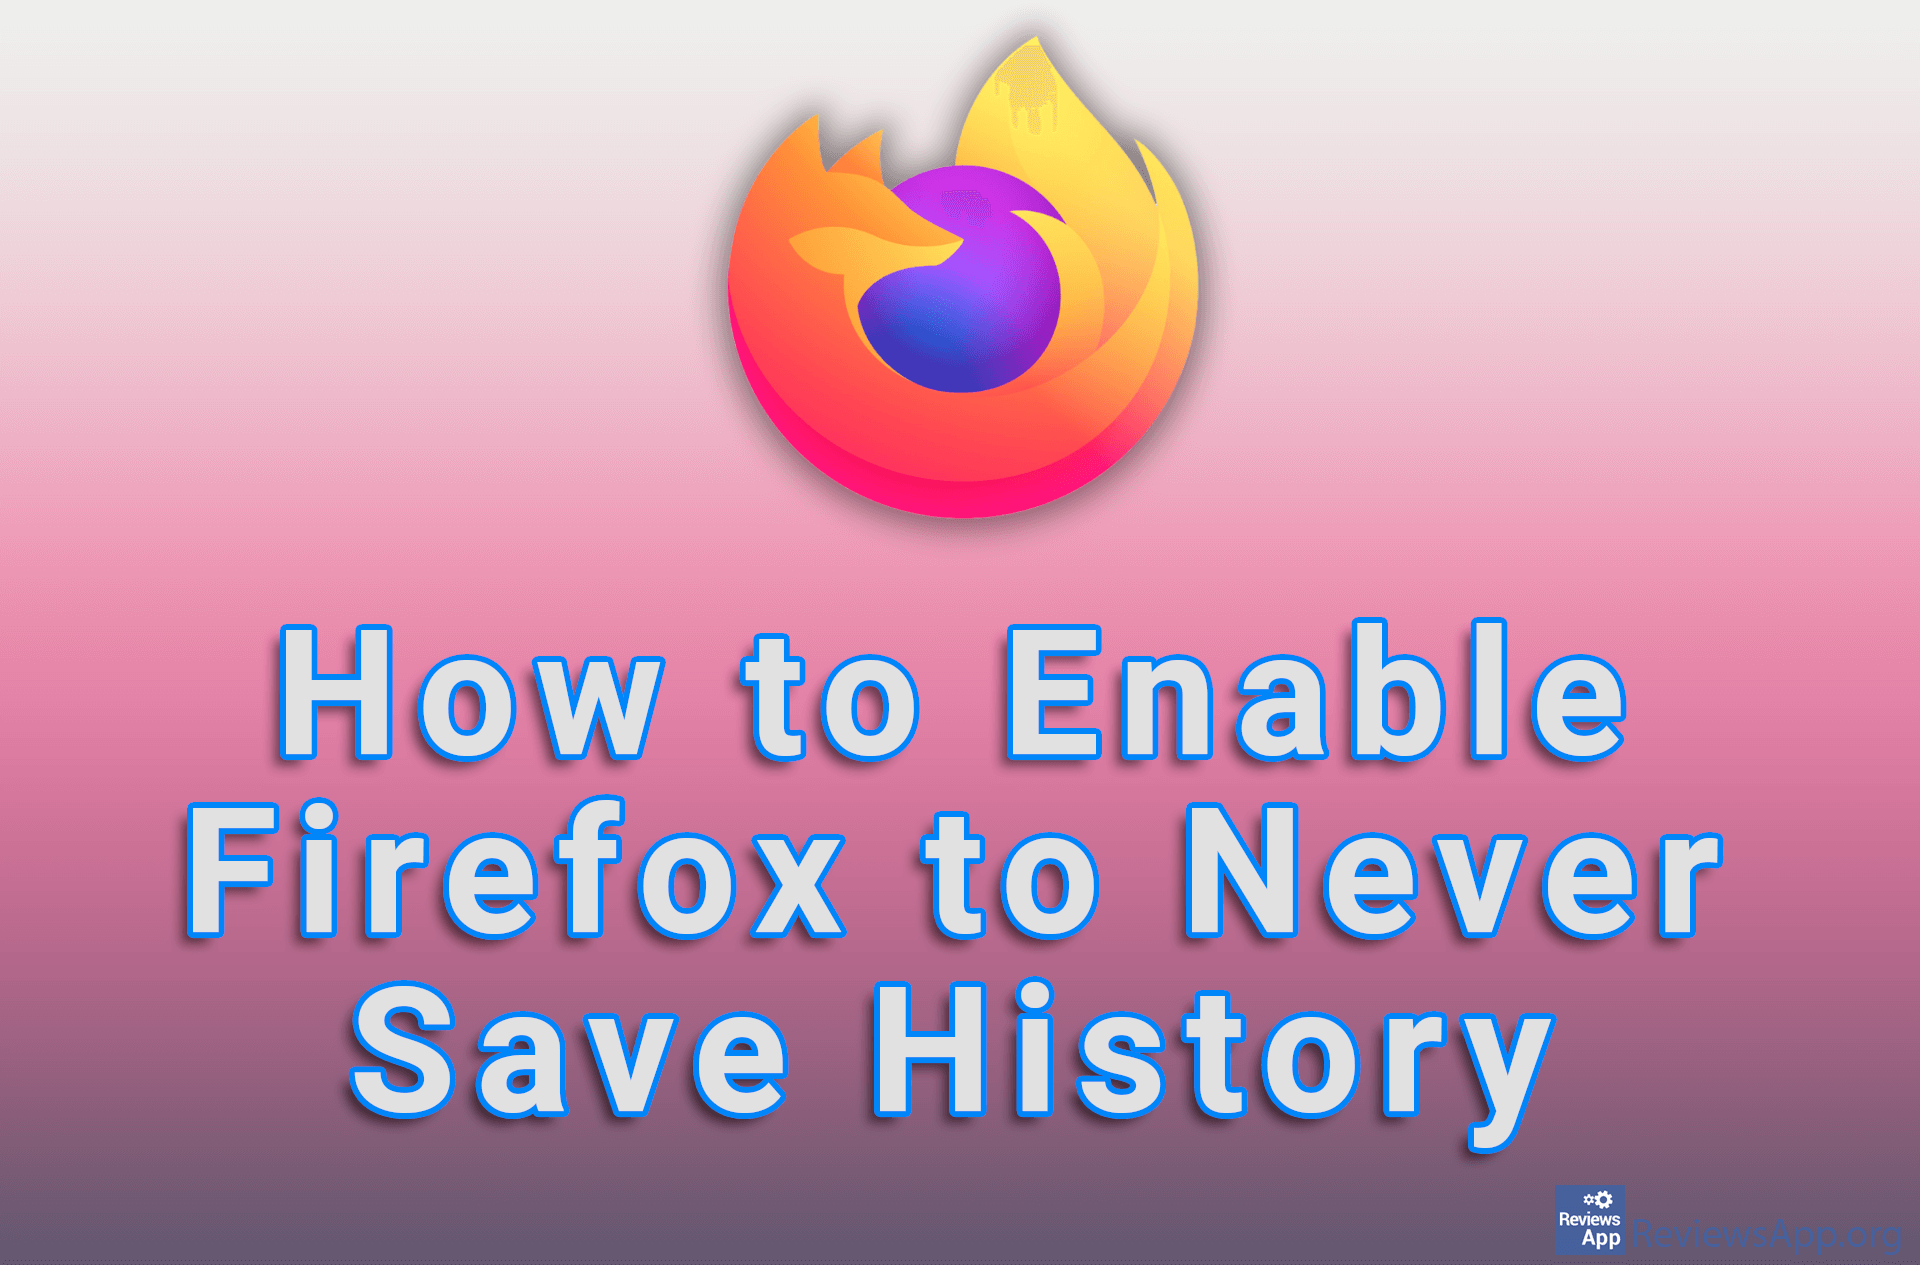 How to Enable Firefox to Never Save History